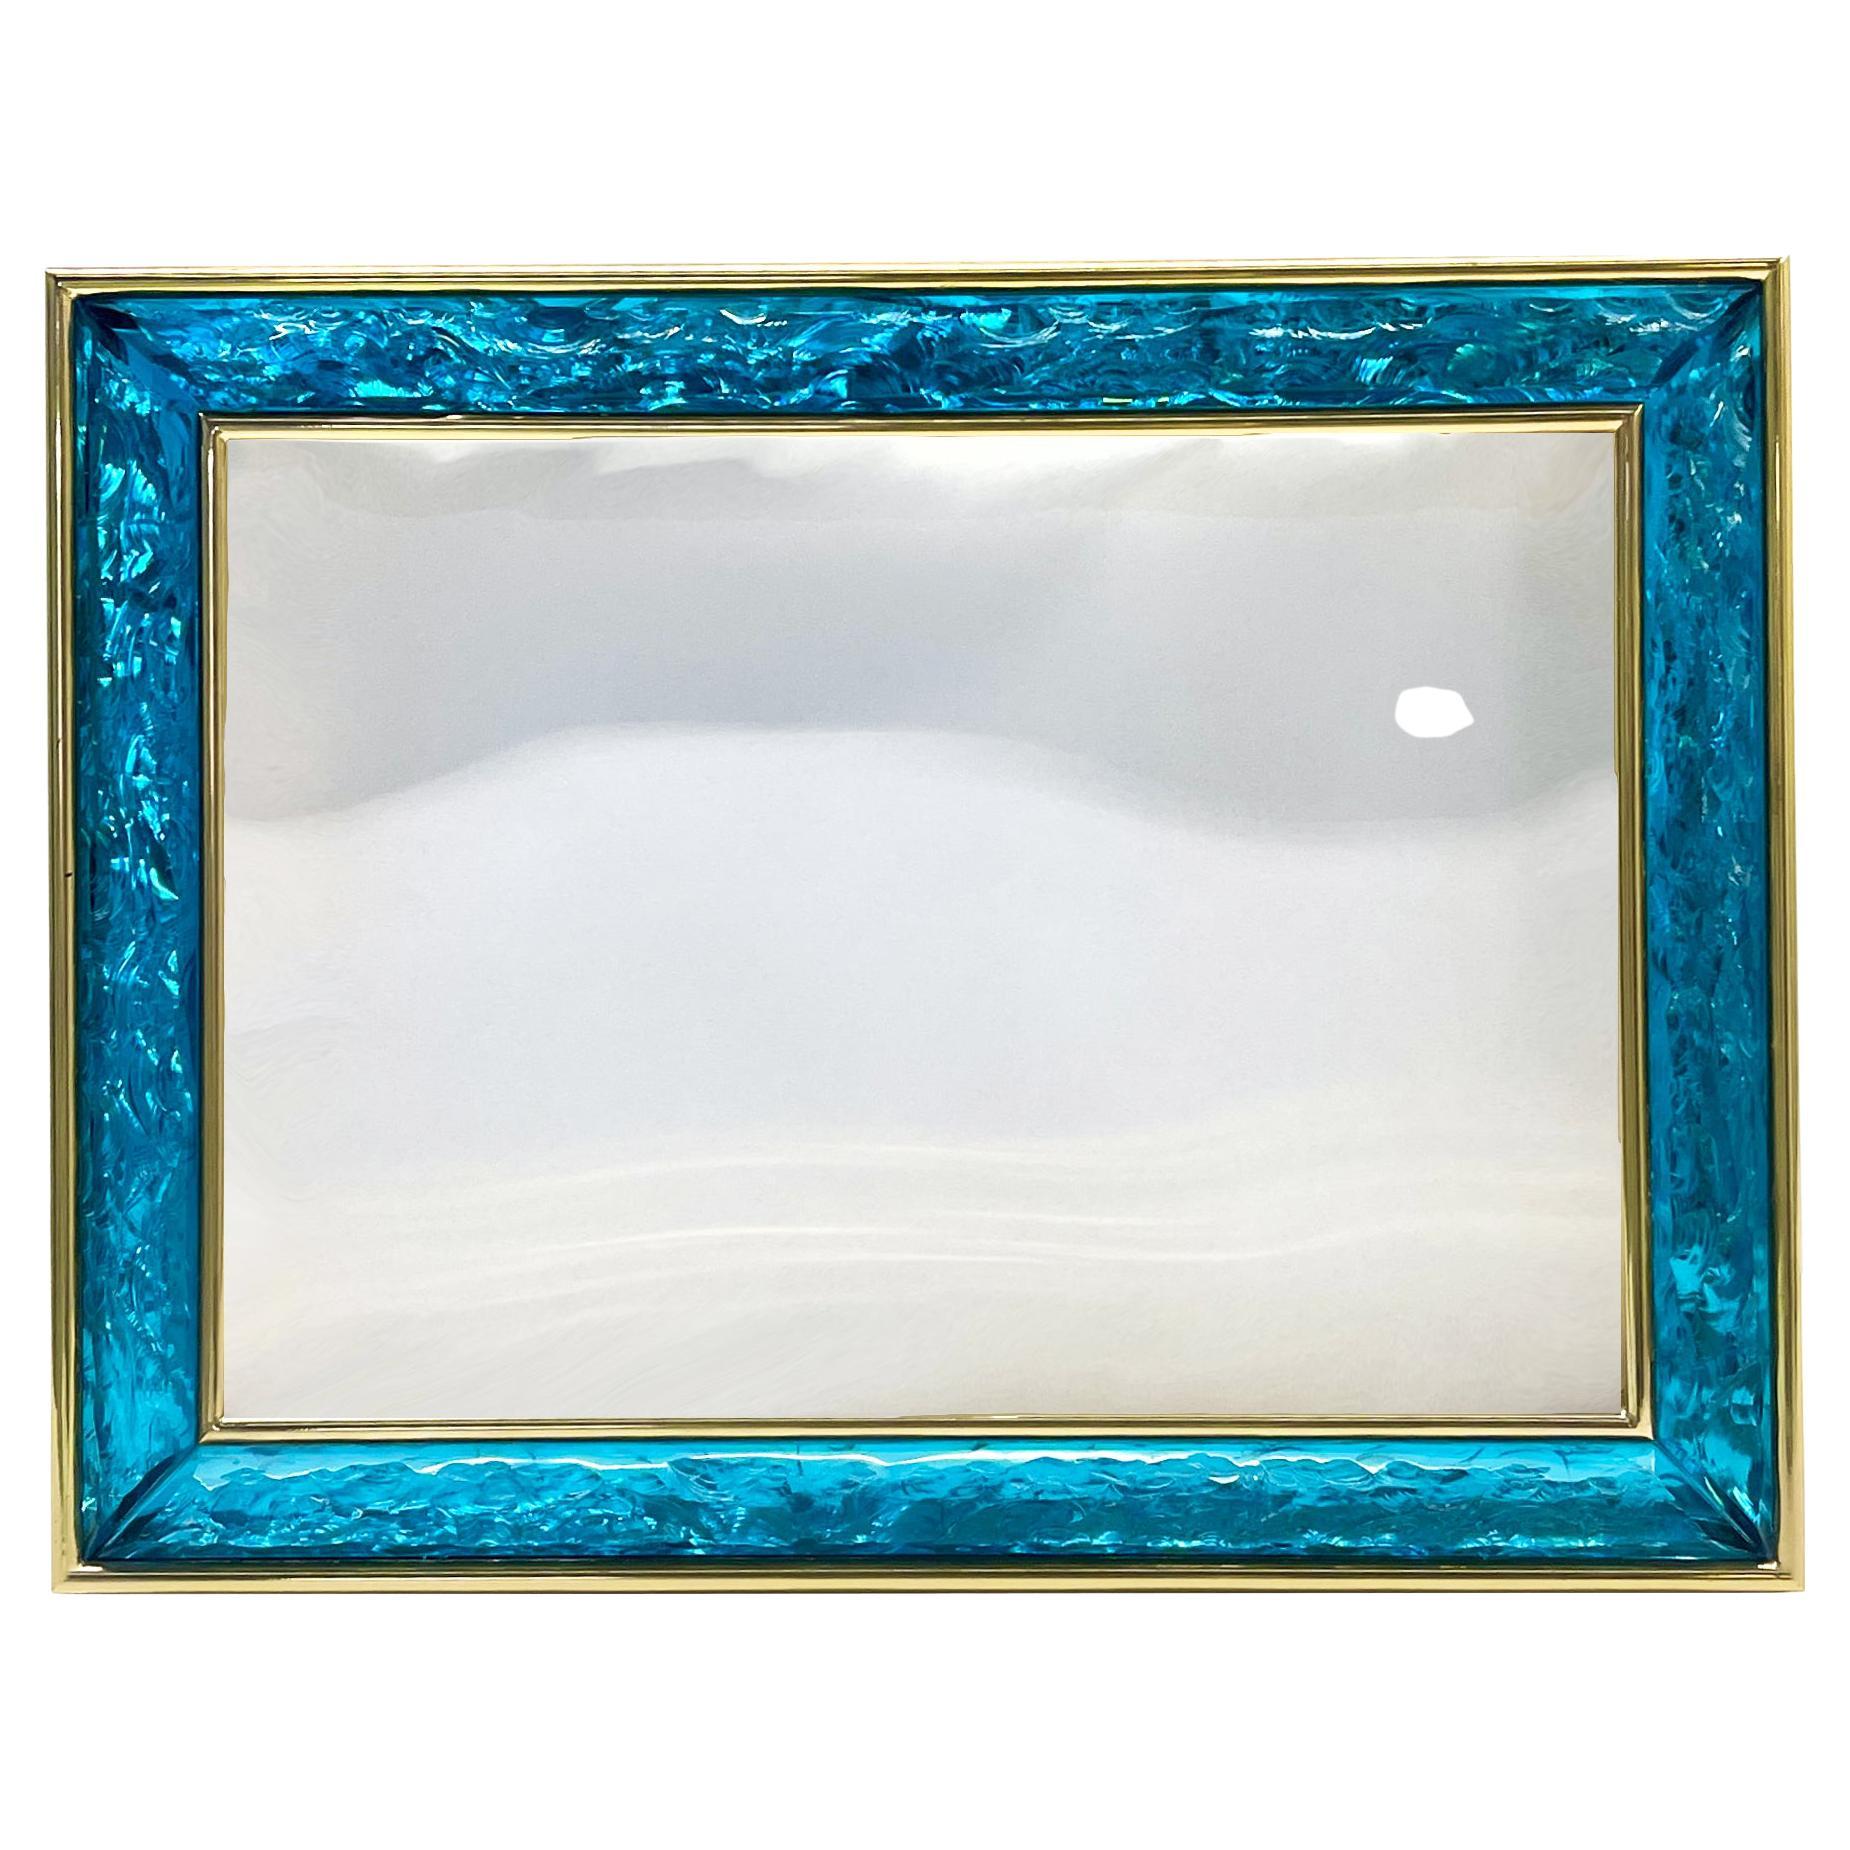 Contemporary Picture Frame Handmade Blue Crystal, Brass and Gold by Ghirò Studio